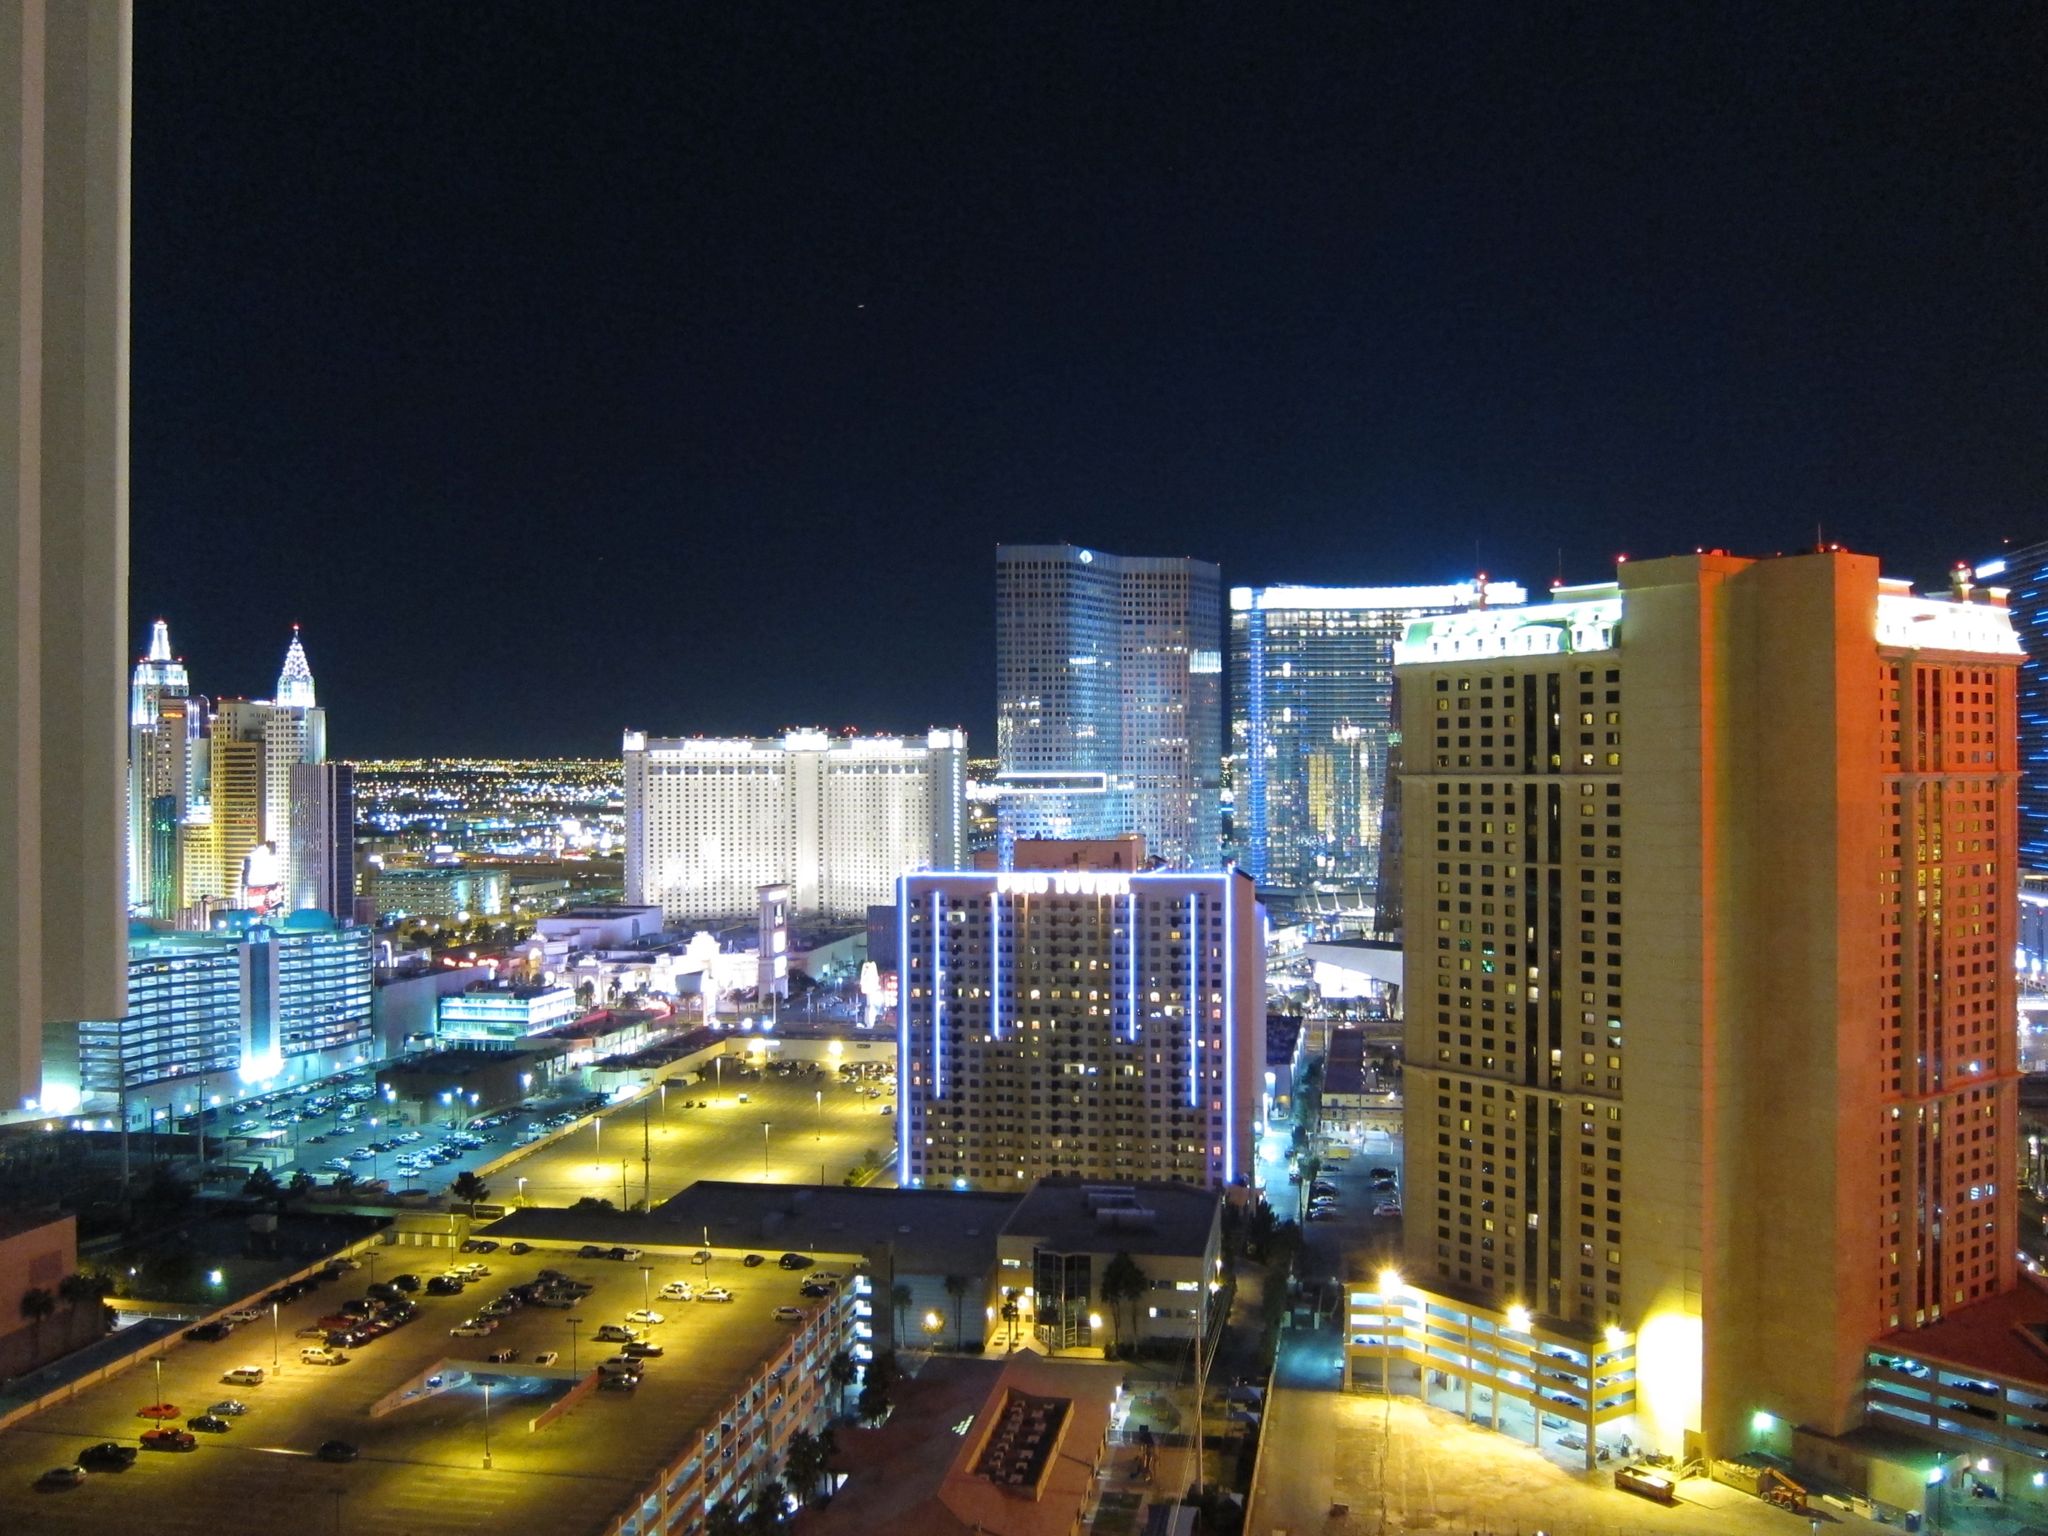 Photo 27 of 44 from the album Highlights Las Vegas 2011.